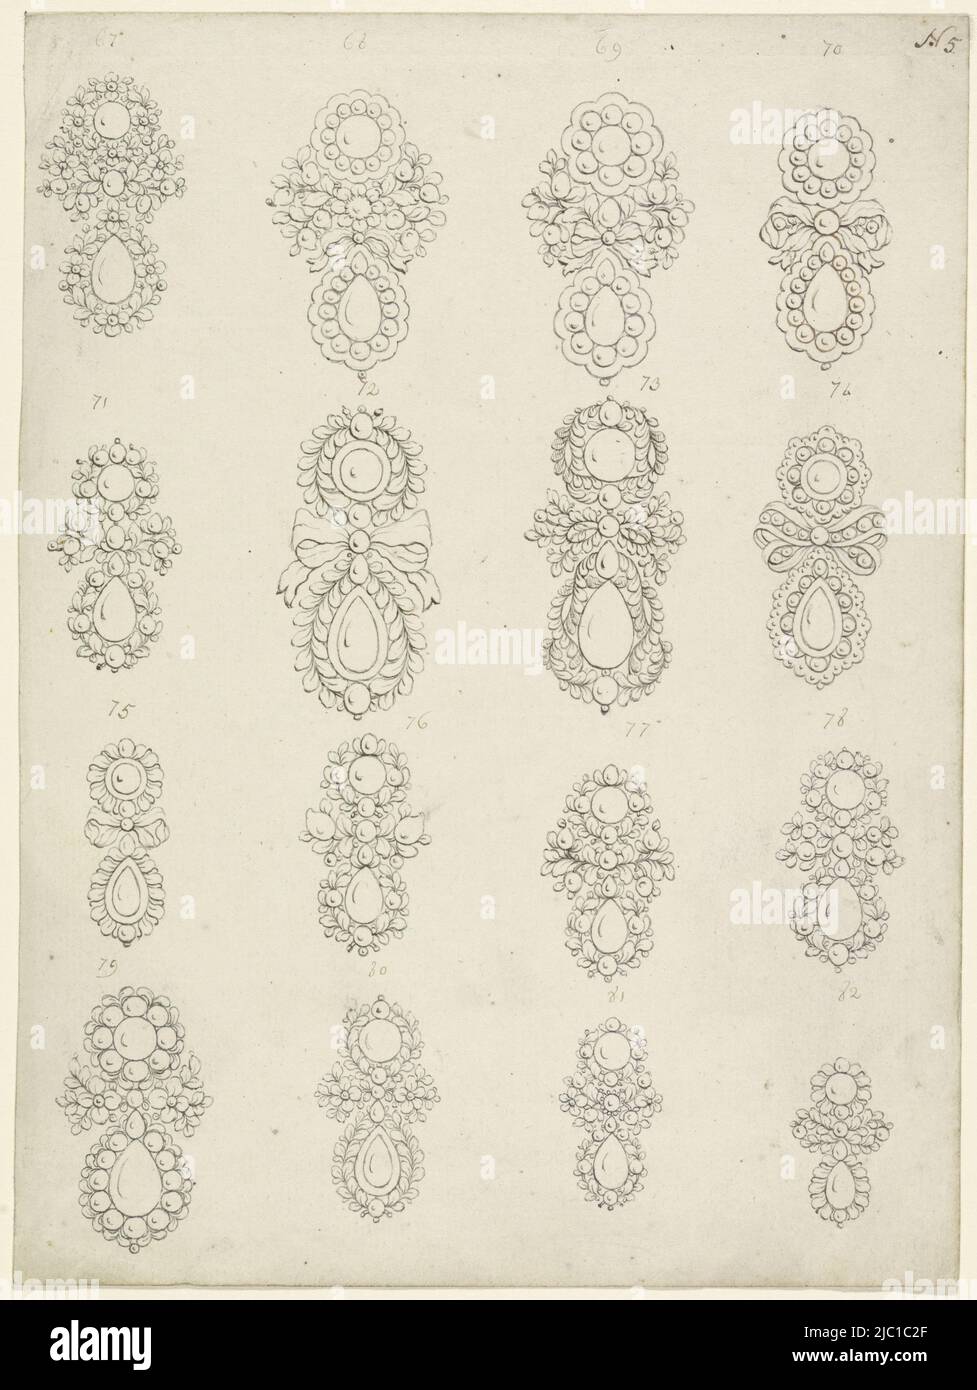 Designs of sixteen earrings with pearls, bows and flower patterns, numbered 67 to 82., Three Sheets with Designs for Earrings Earrings, draughtsman: anonymous, France, (possibly), c. 1750 - c. 1780, paper, pen, h 265 mm × w 198 mm Stock Photo